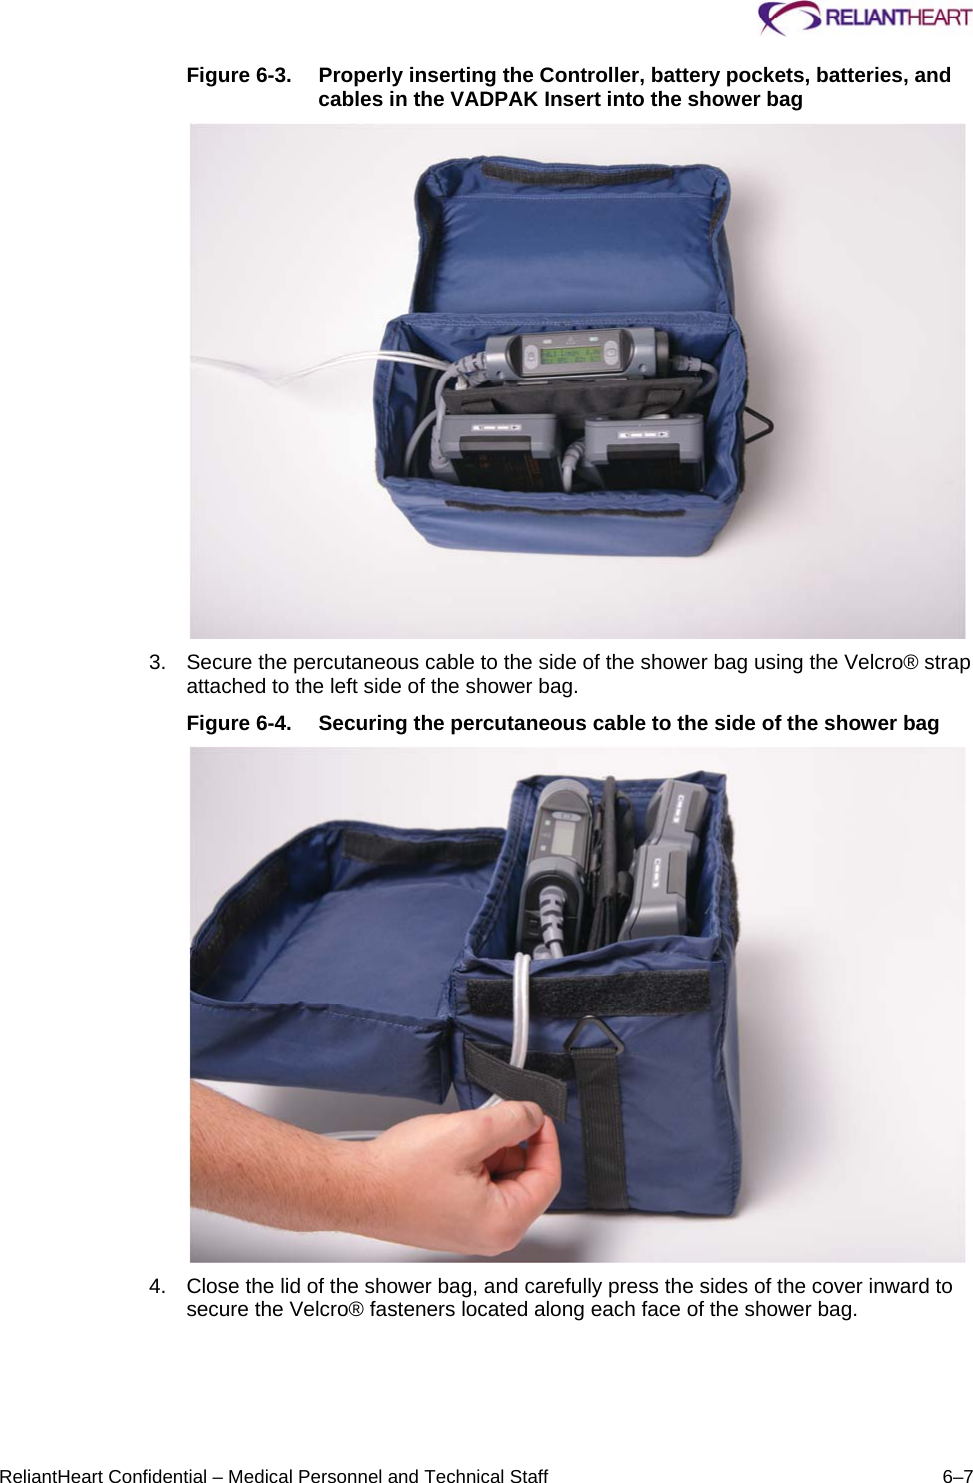     ReliantHeart Confidential – Medical Personnel and Technical Staff  6–7 Figure 6-3.  Properly inserting the Controller, battery pockets, batteries, and cables in the VADPAK Insert into the shower bag   3.  Secure the percutaneous cable to the side of the shower bag using the Velcro® strap attached to the left side of the shower bag.  Figure 6-4.  Securing the percutaneous cable to the side of the shower bag   4.  Close the lid of the shower bag, and carefully press the sides of the cover inward to secure the Velcro® fasteners located along each face of the shower bag.  